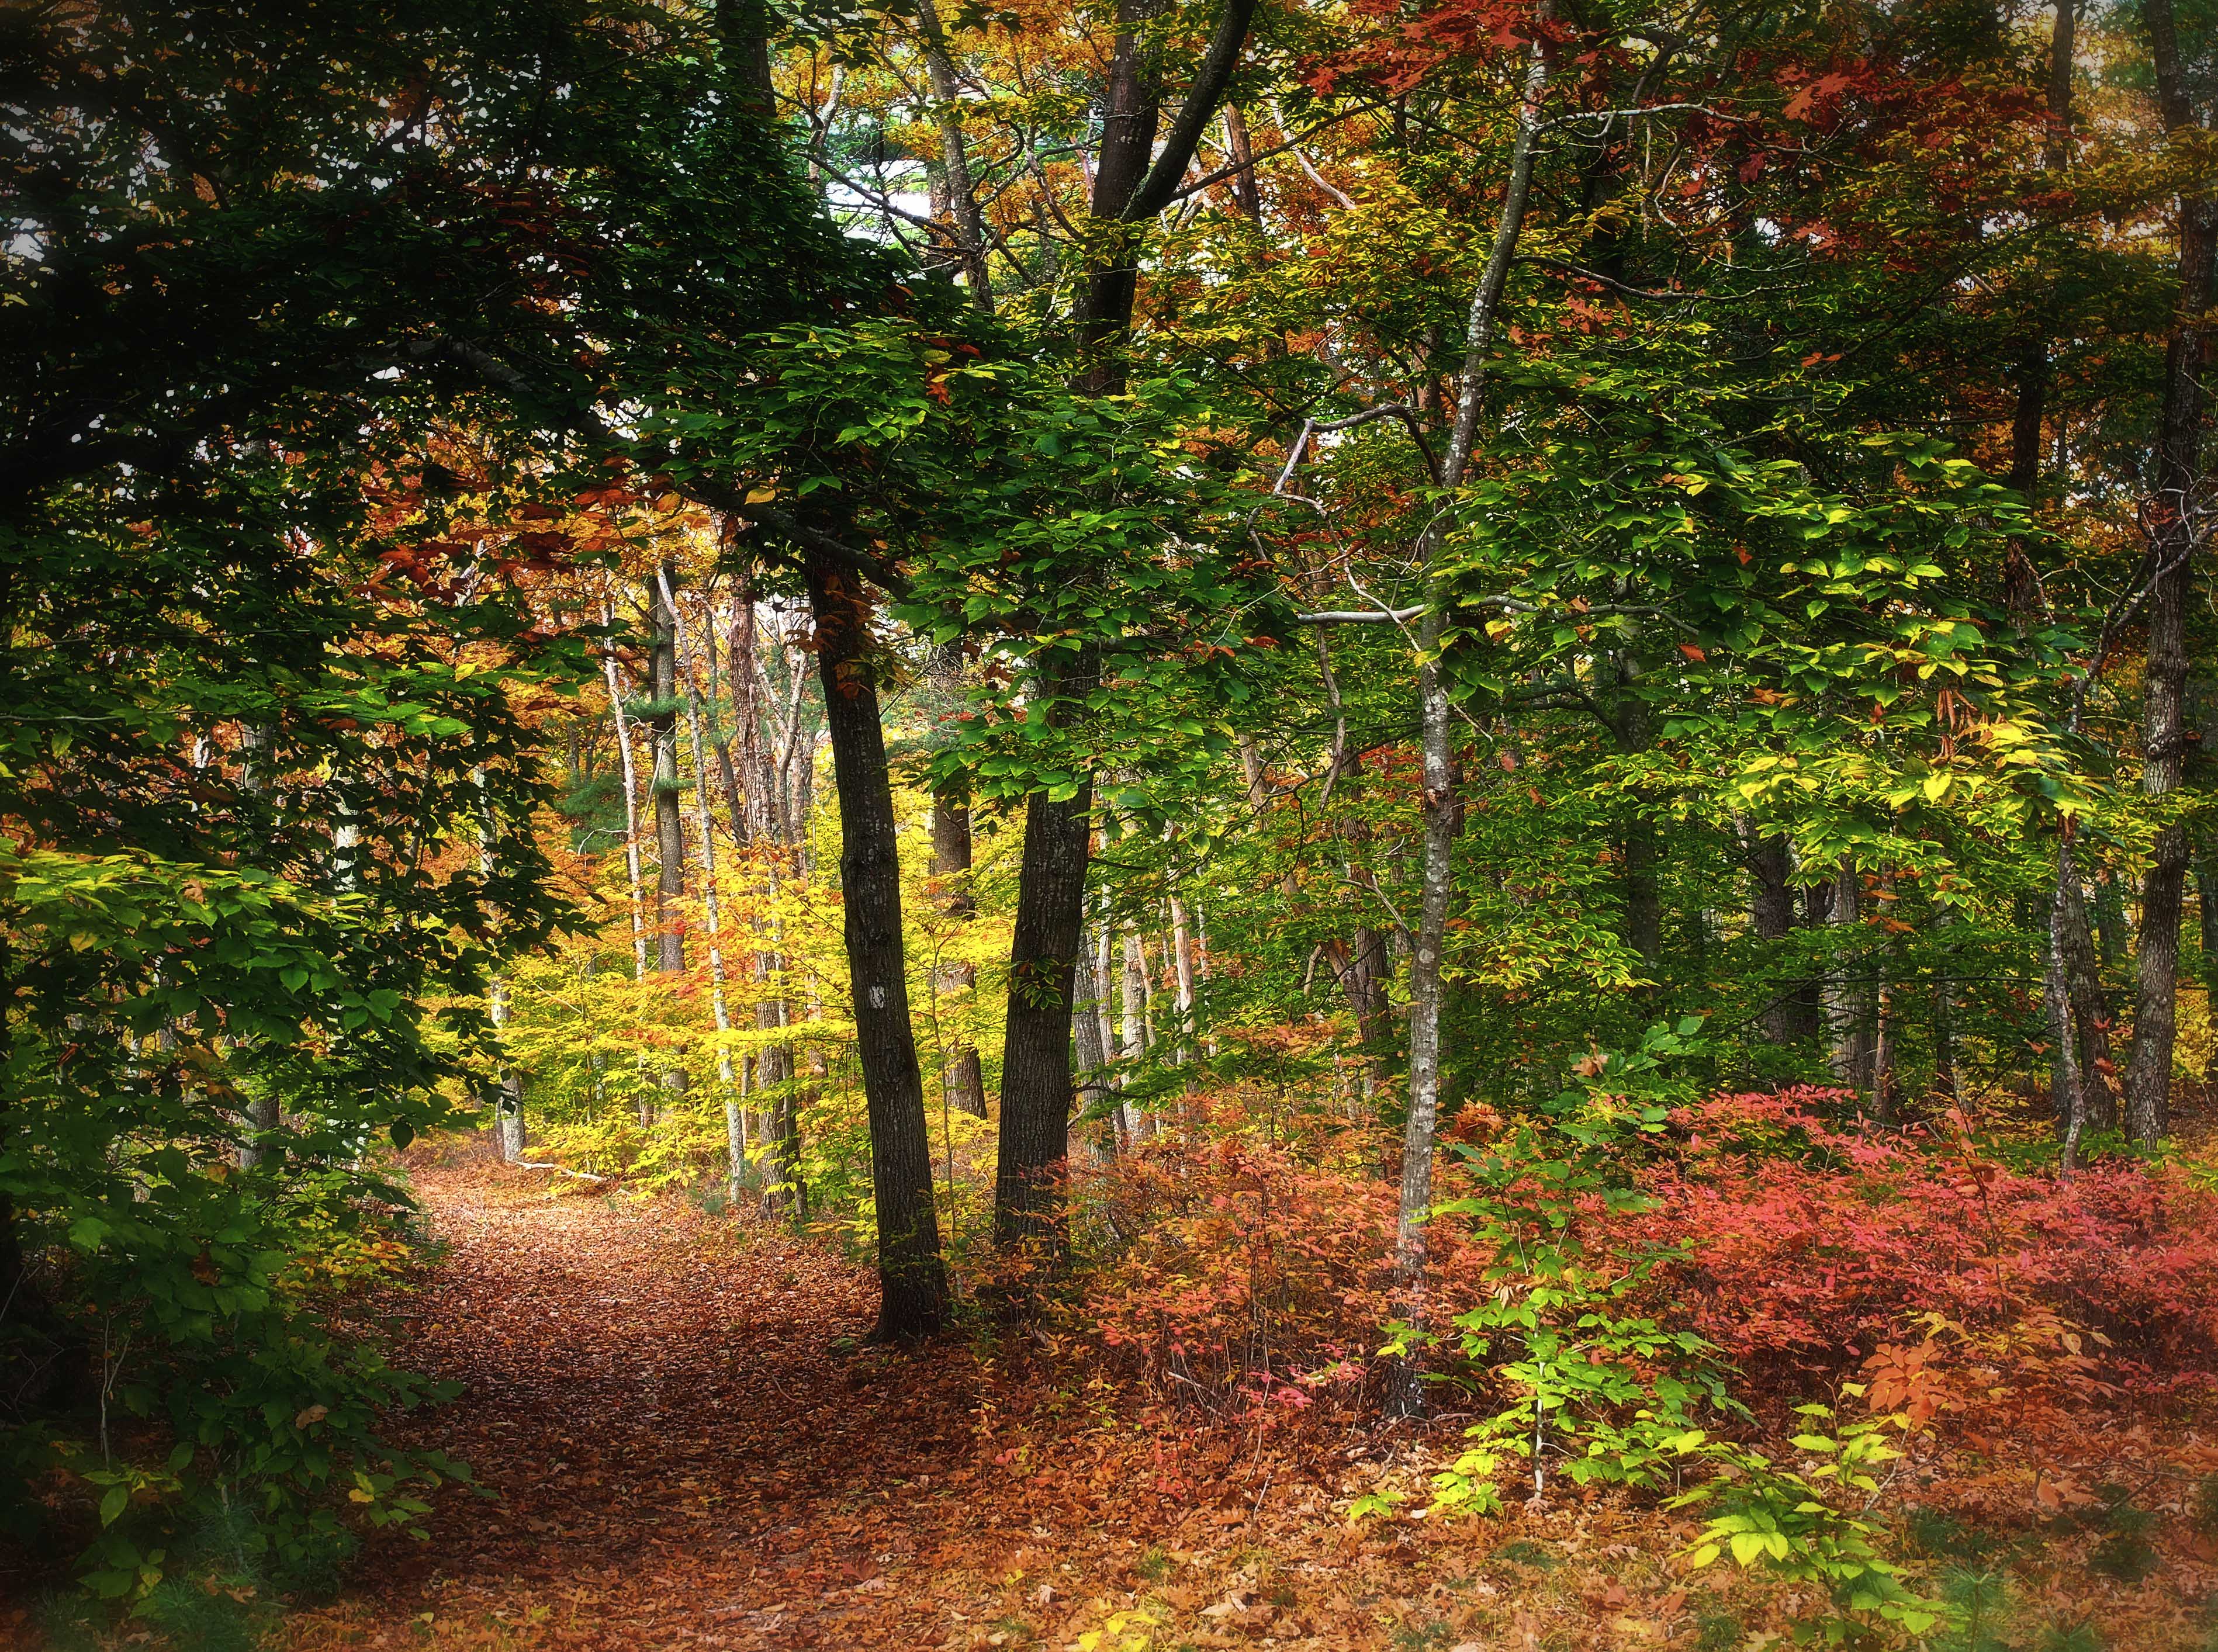 Looking into a forest with green, orange, and yellow colored tree leaves.